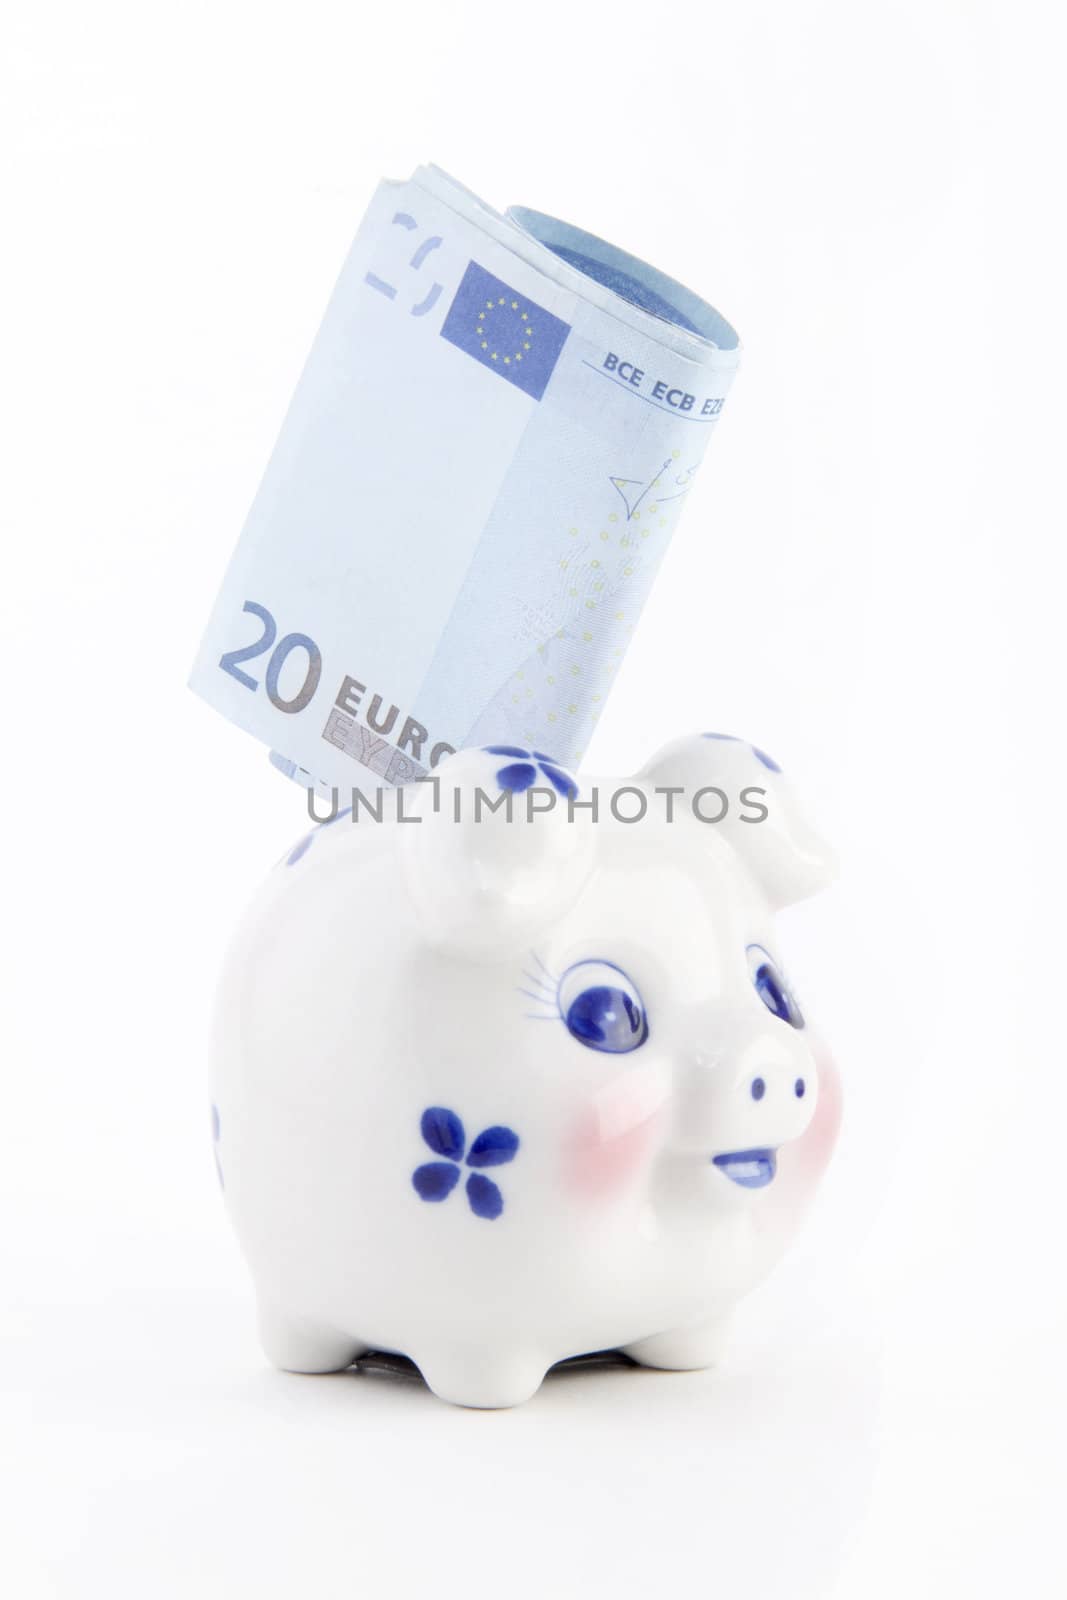 piggy bank with euro isolated on white